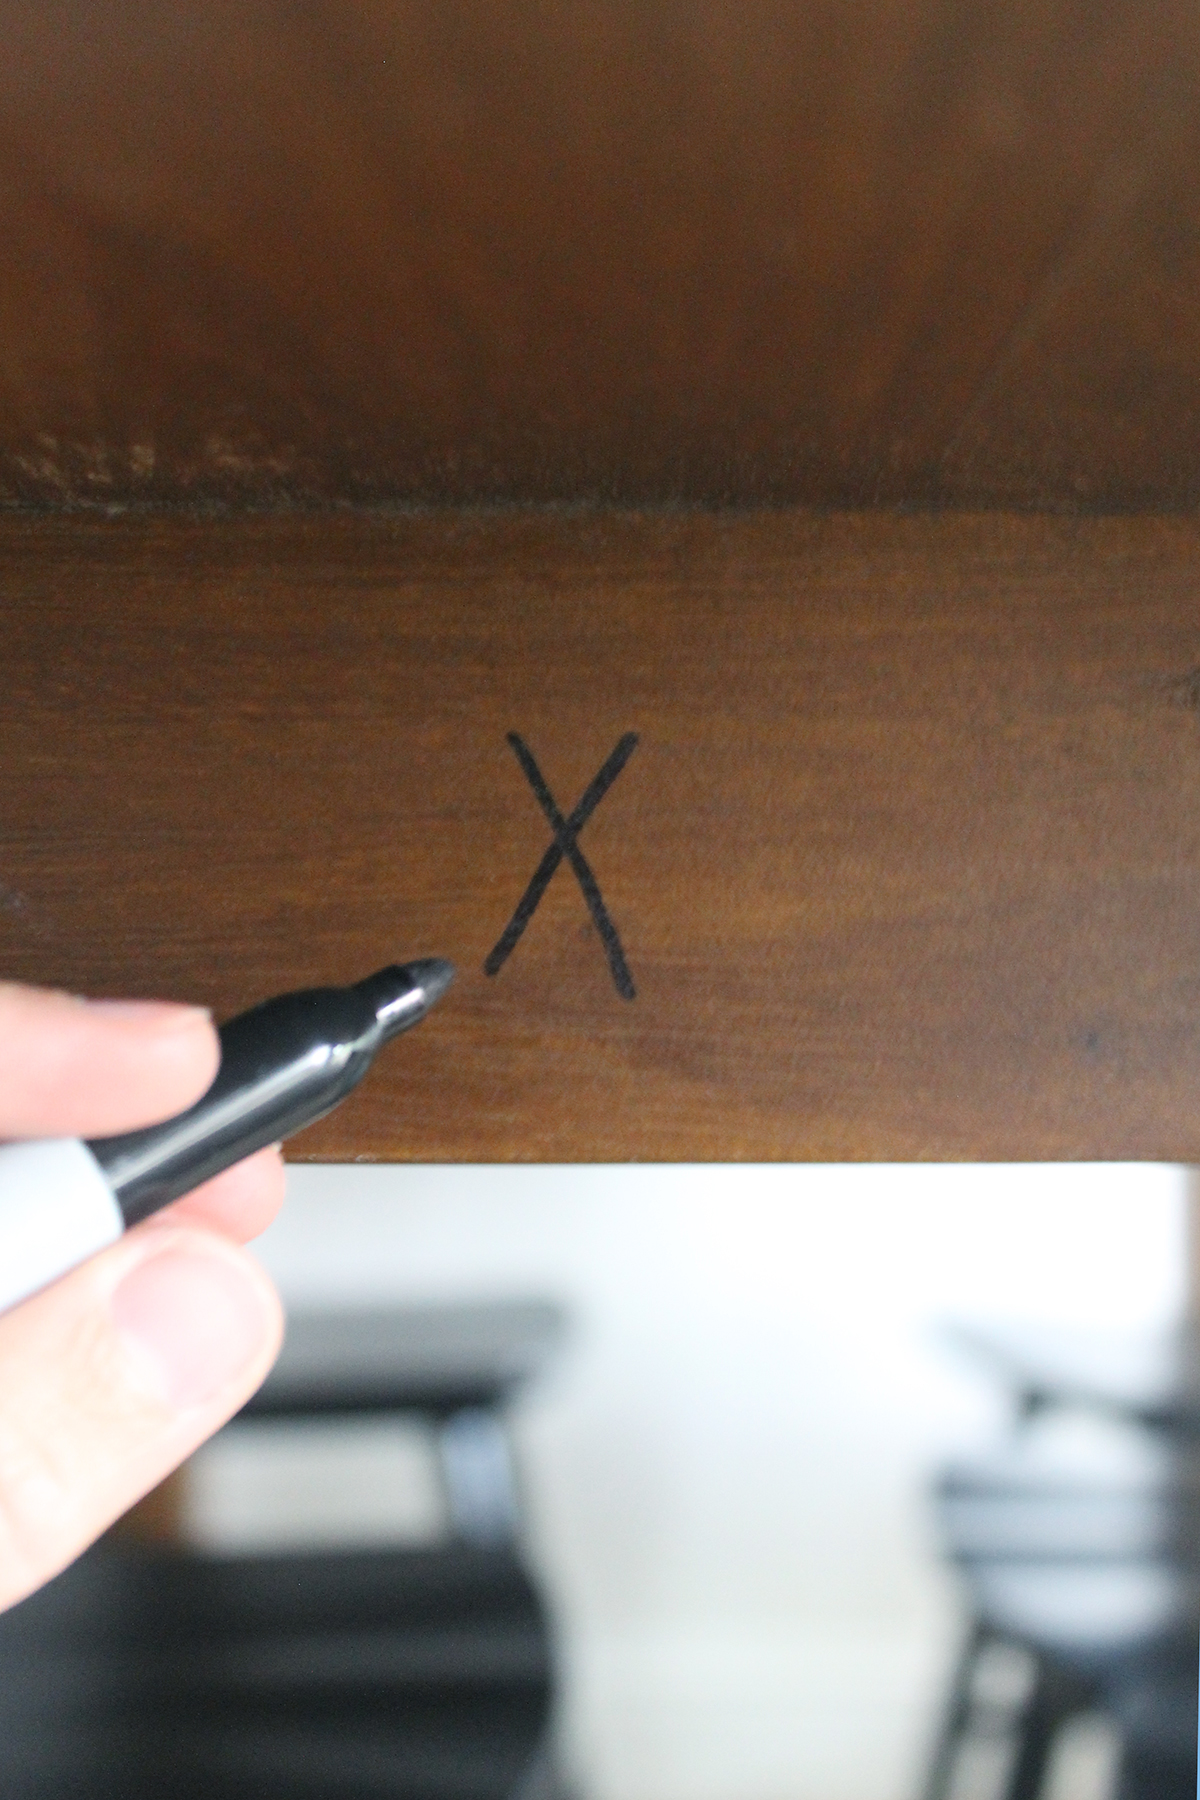 How to Remove Permanent Marker from Wood